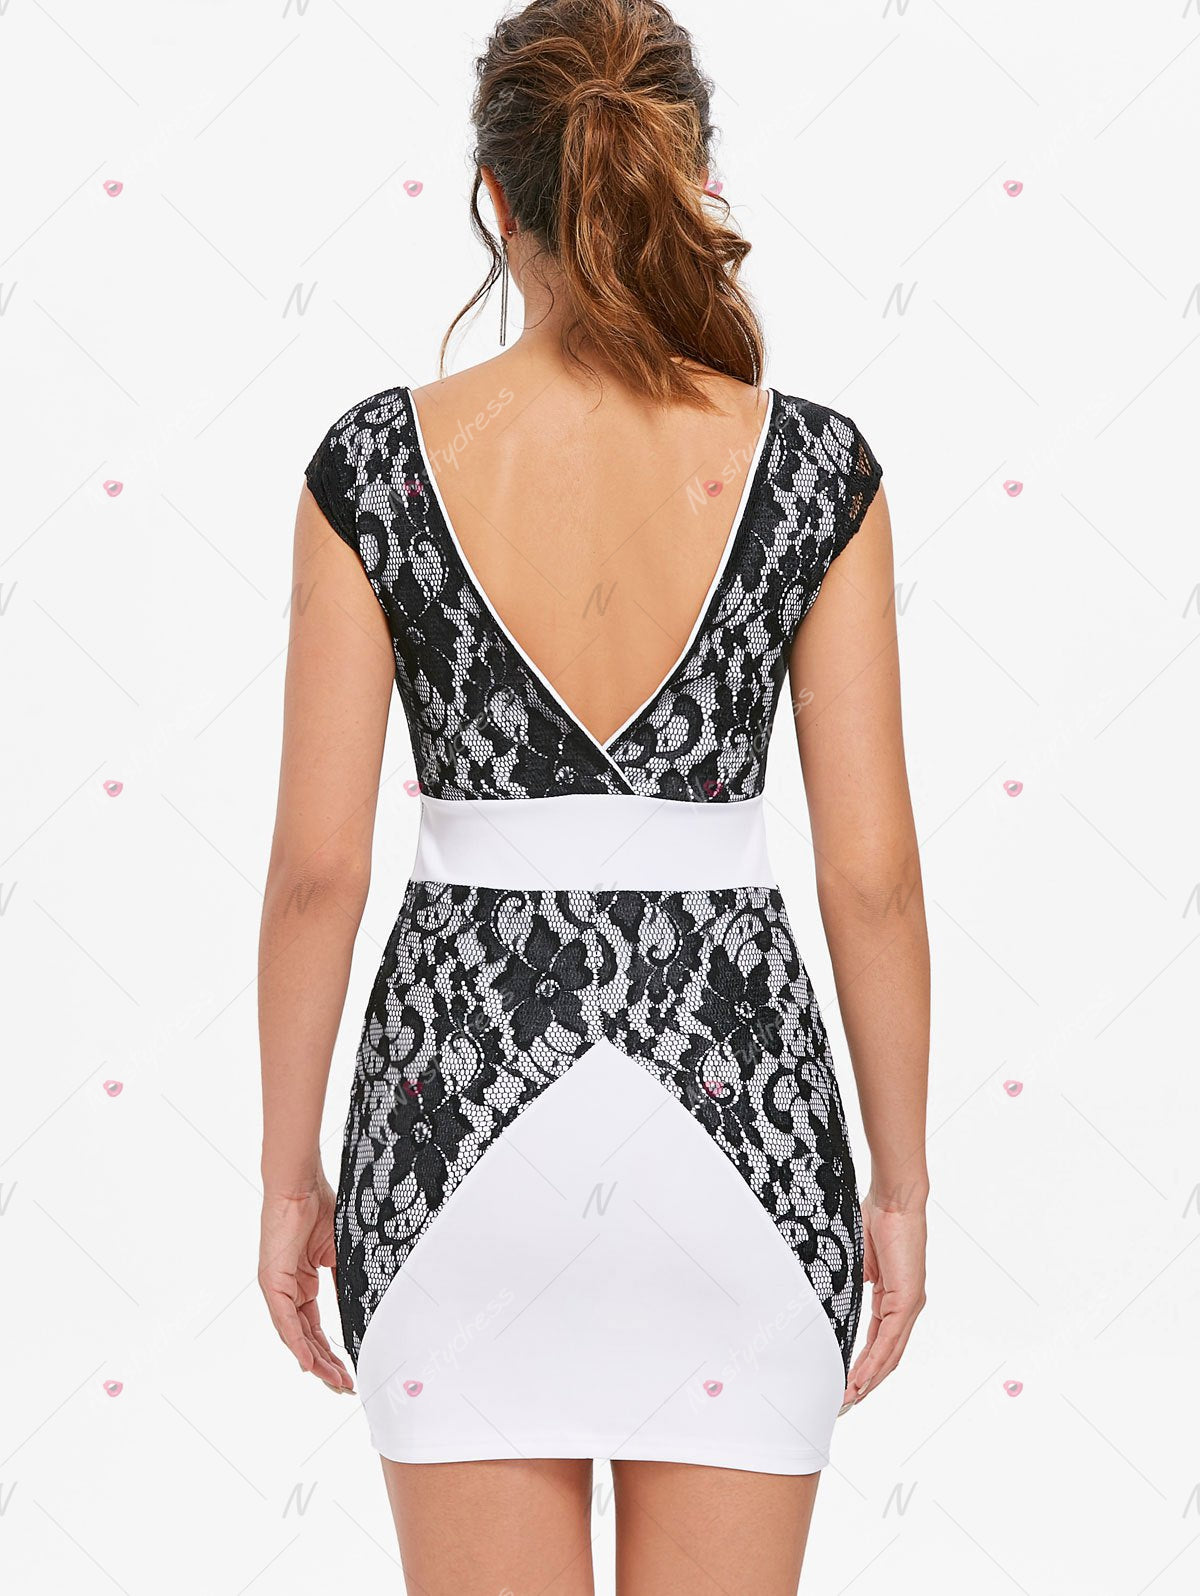 Contrast Lace Bodycon Mini Homecoming Dress